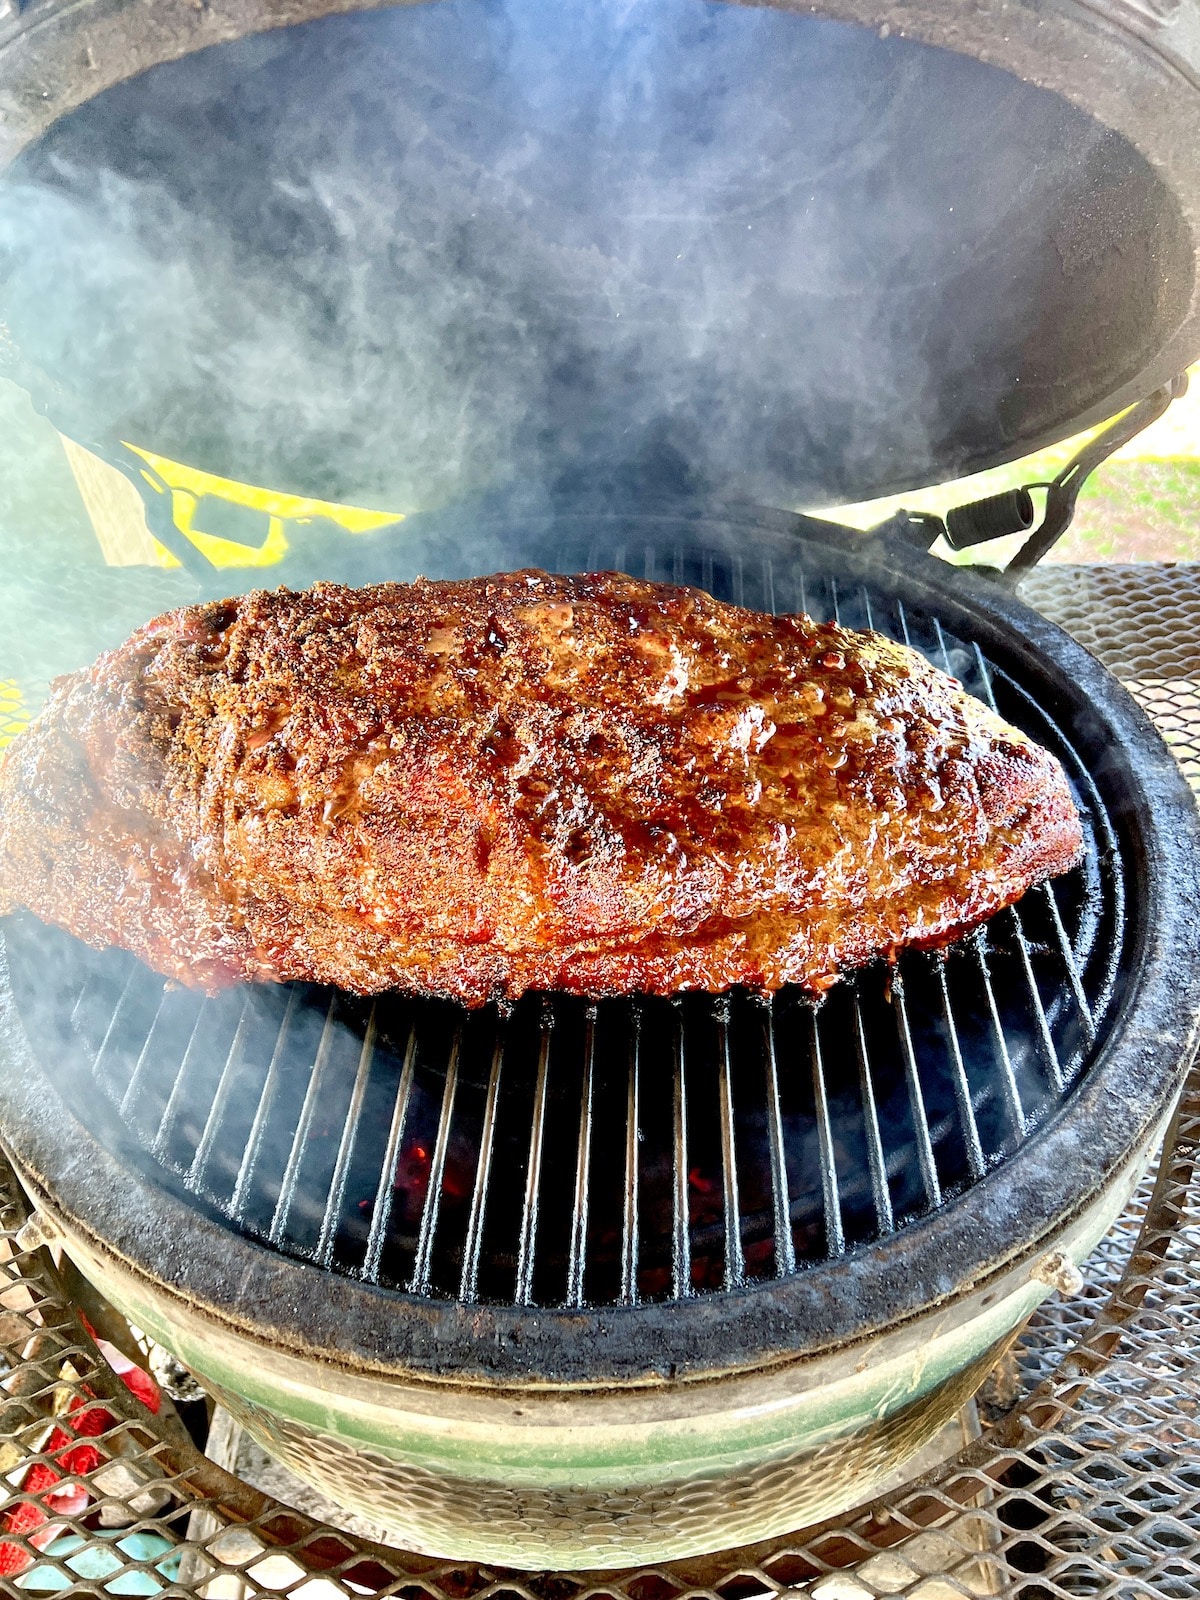 Smoking a whole brisket on a Big Green Egg grill.